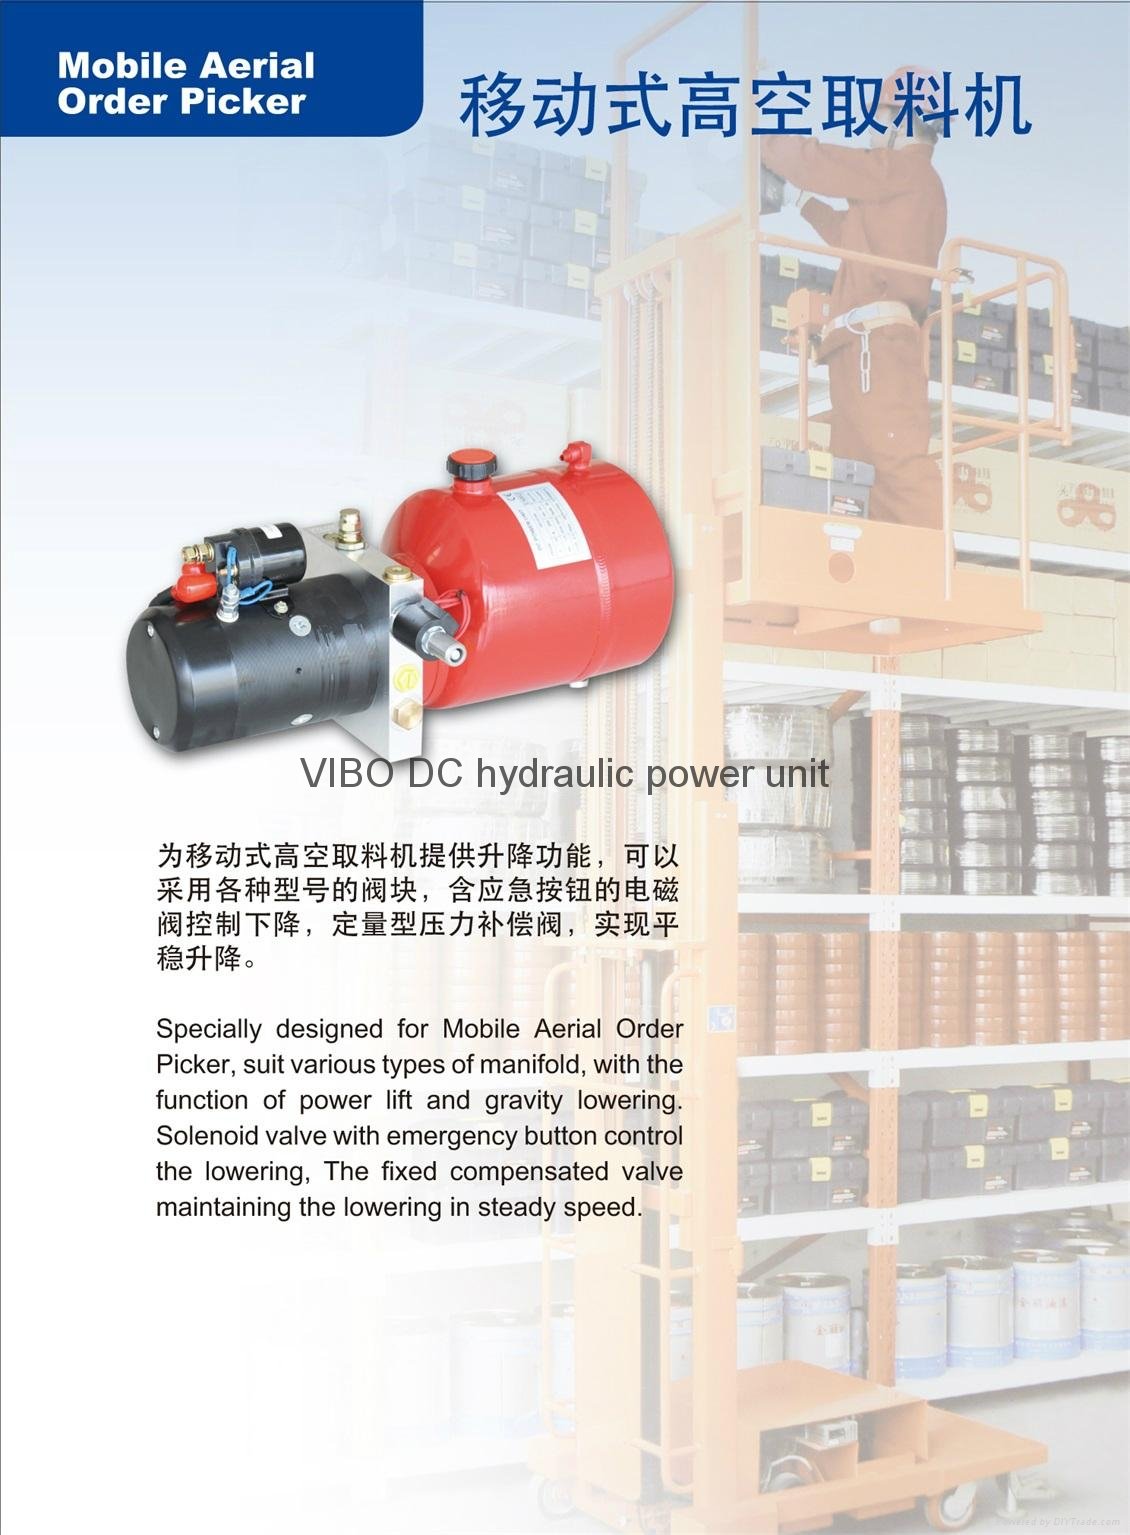 Hydraulic power units for Mobile Aerial order Picker 4